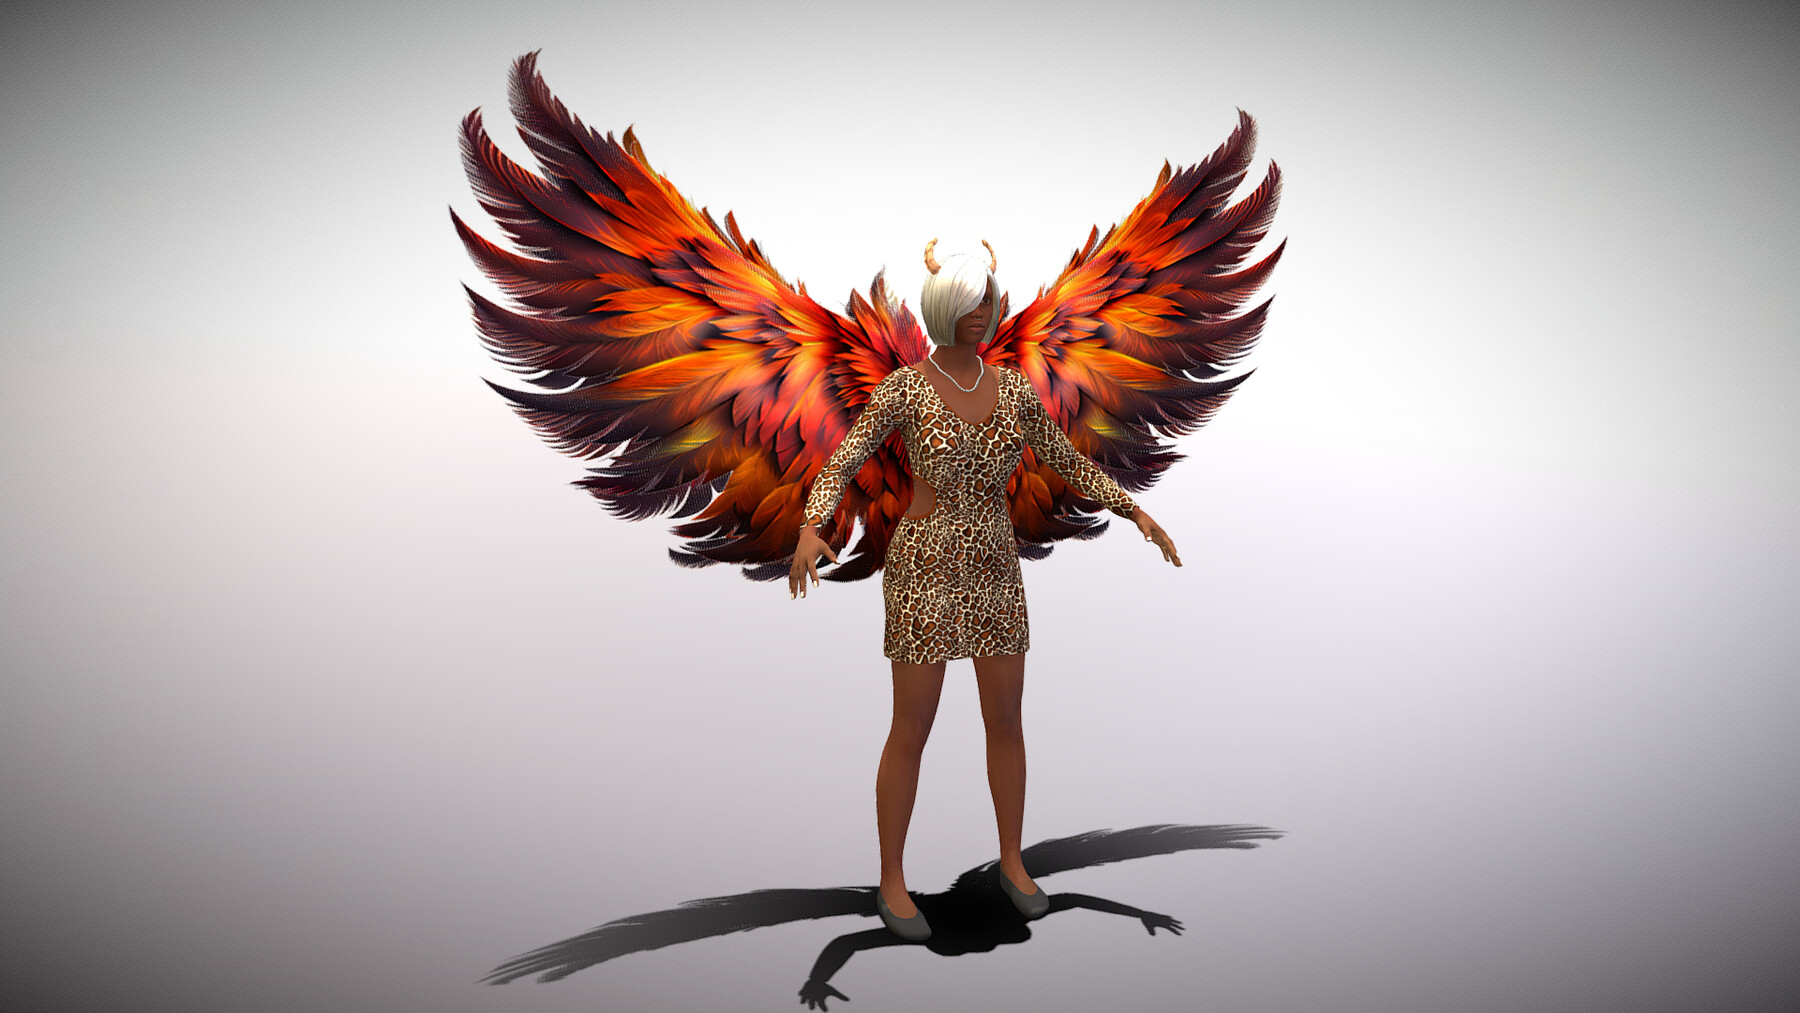 ArtStation - Animated Phoenix Wings Low-poly 3D model | Game Assets